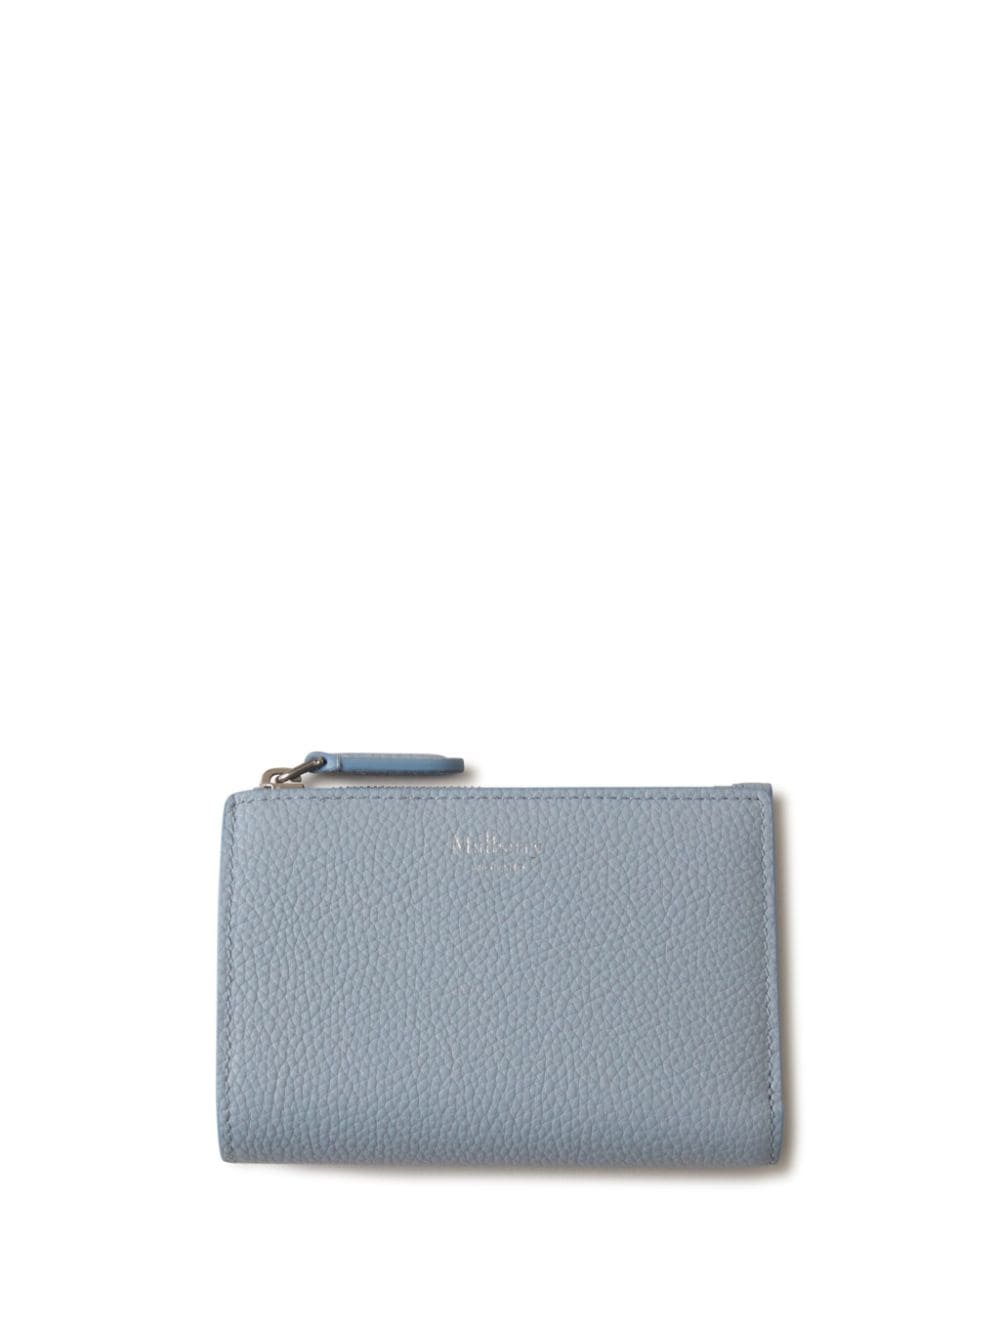 Mulberry Continental Bi-fold Leather Wallet In Gray